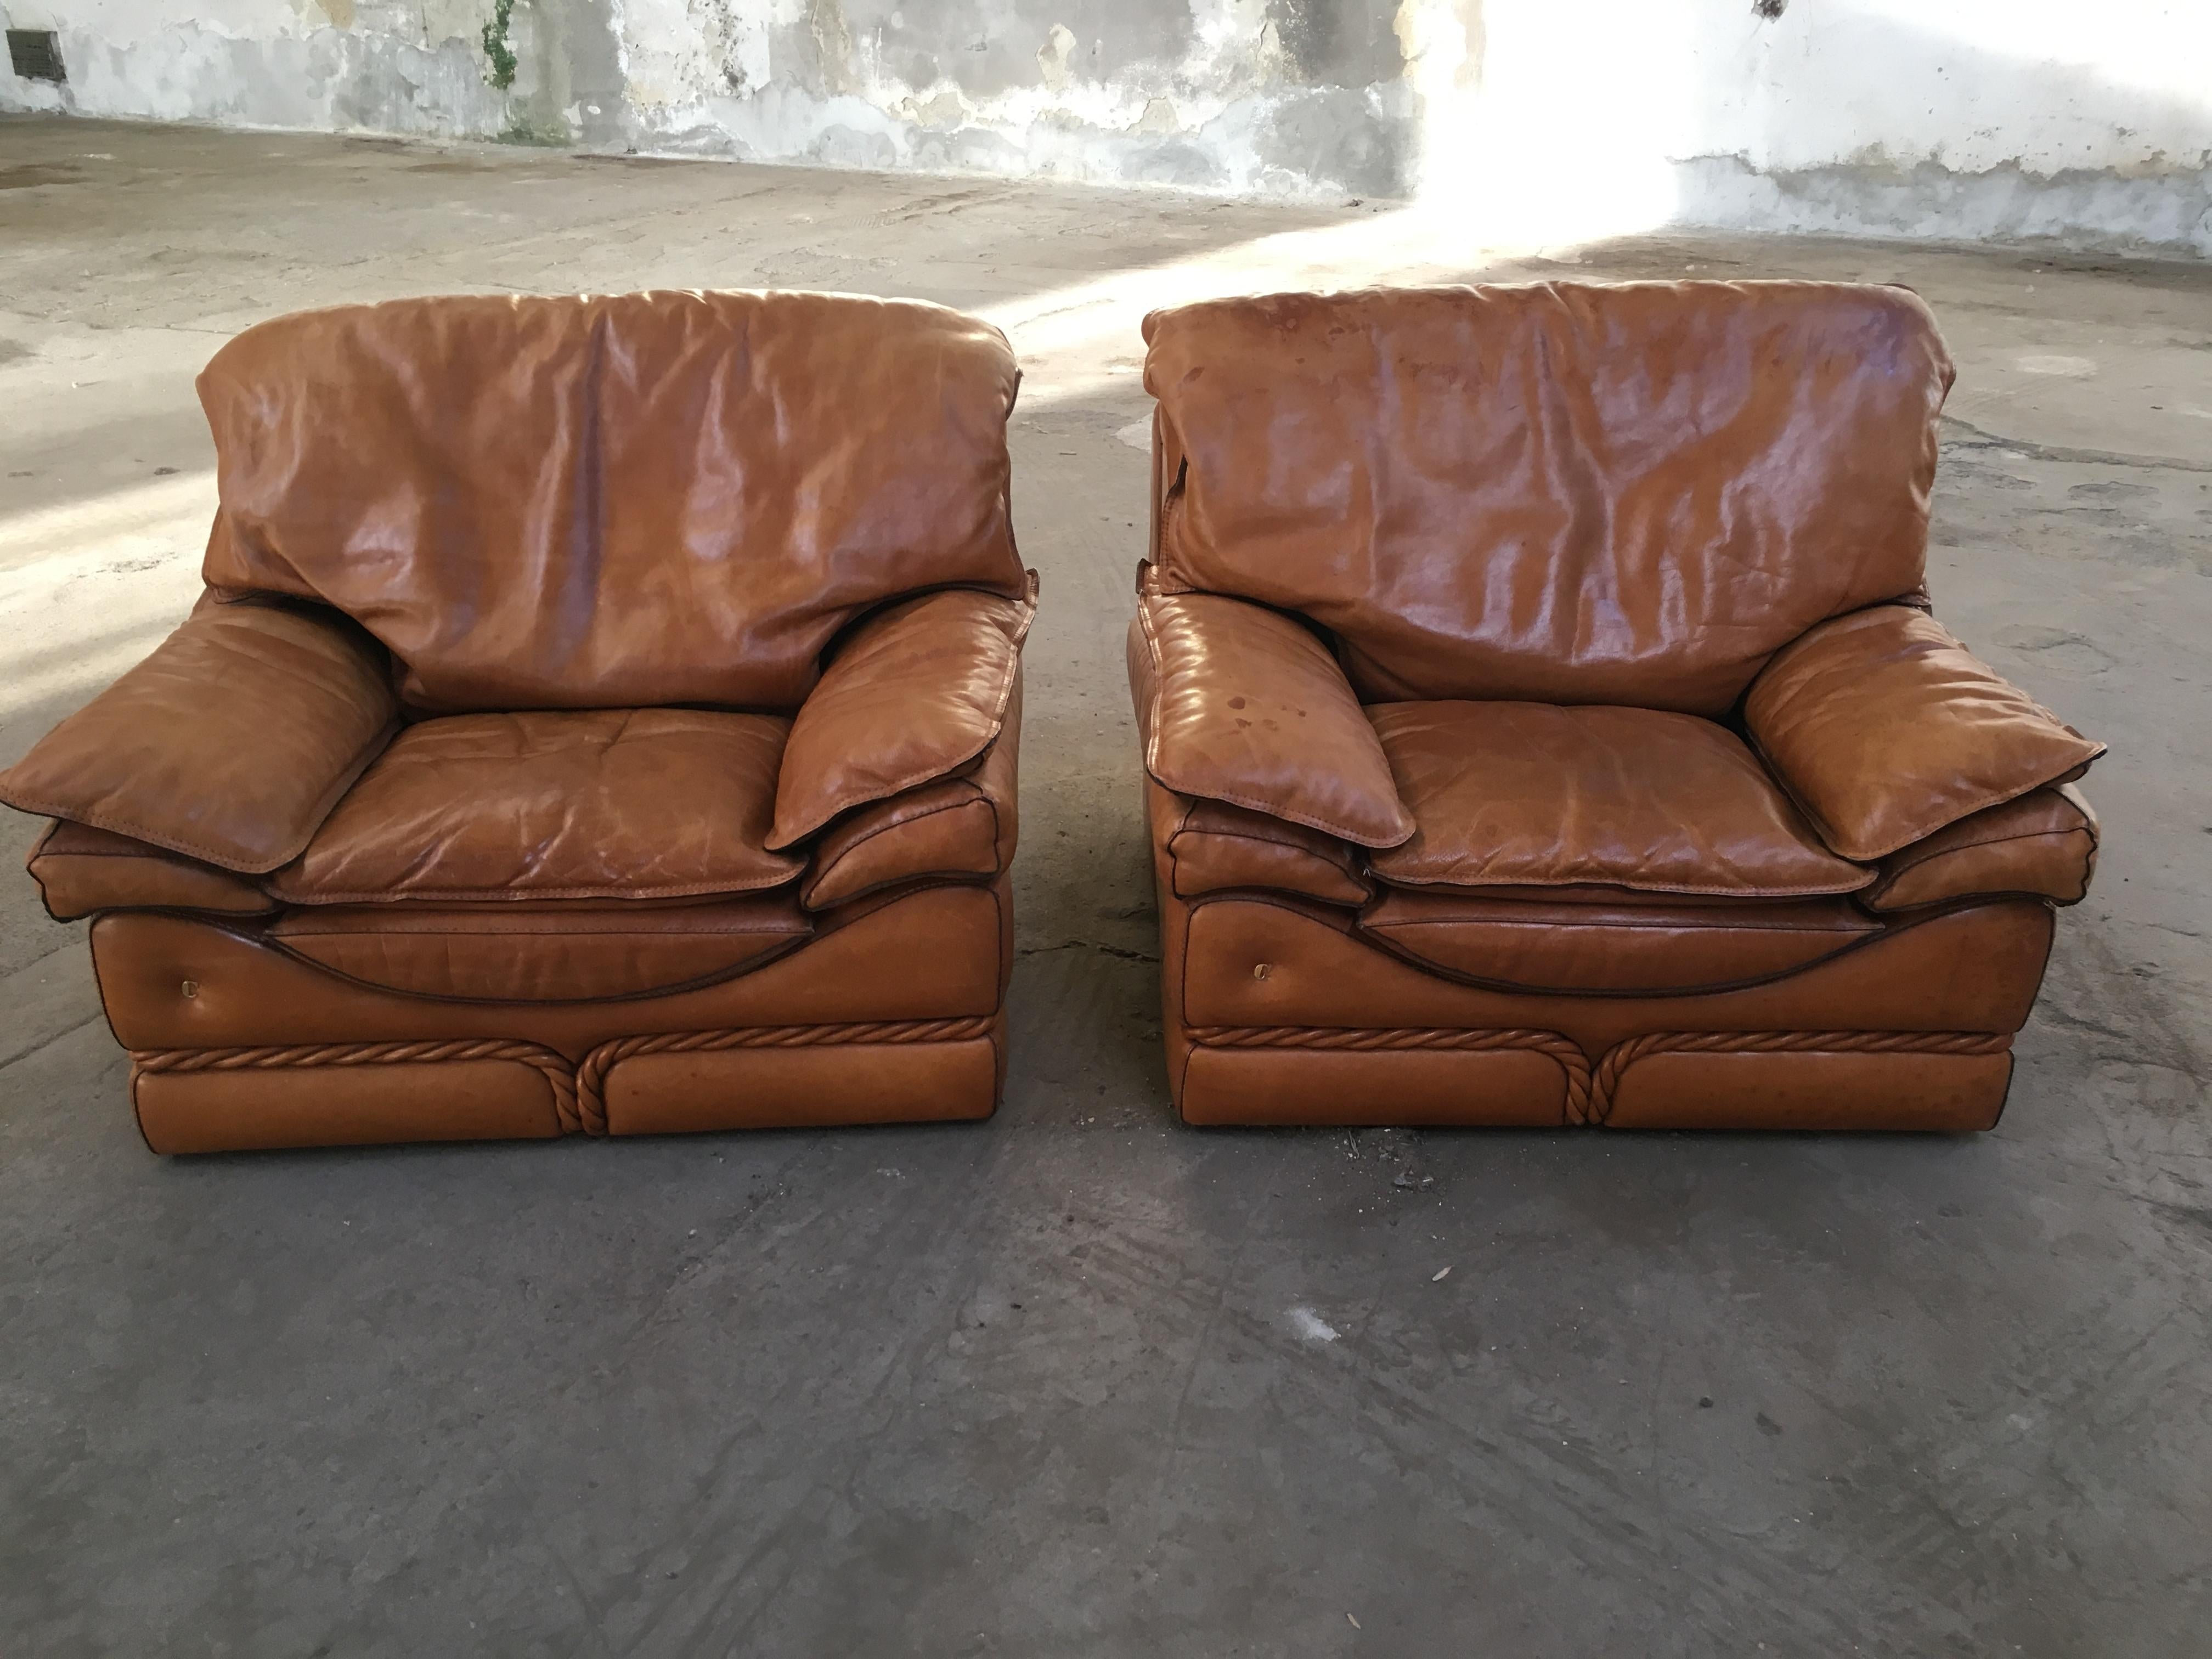 Mid-Century Modern pair of Italian natural leather armchairs by Mobilificio Colombo from late 1970s.
The armchairs have a stunning leather rope decoration on the front who runs all around the structure.
Measures:
Width cm 100
Depth: cm